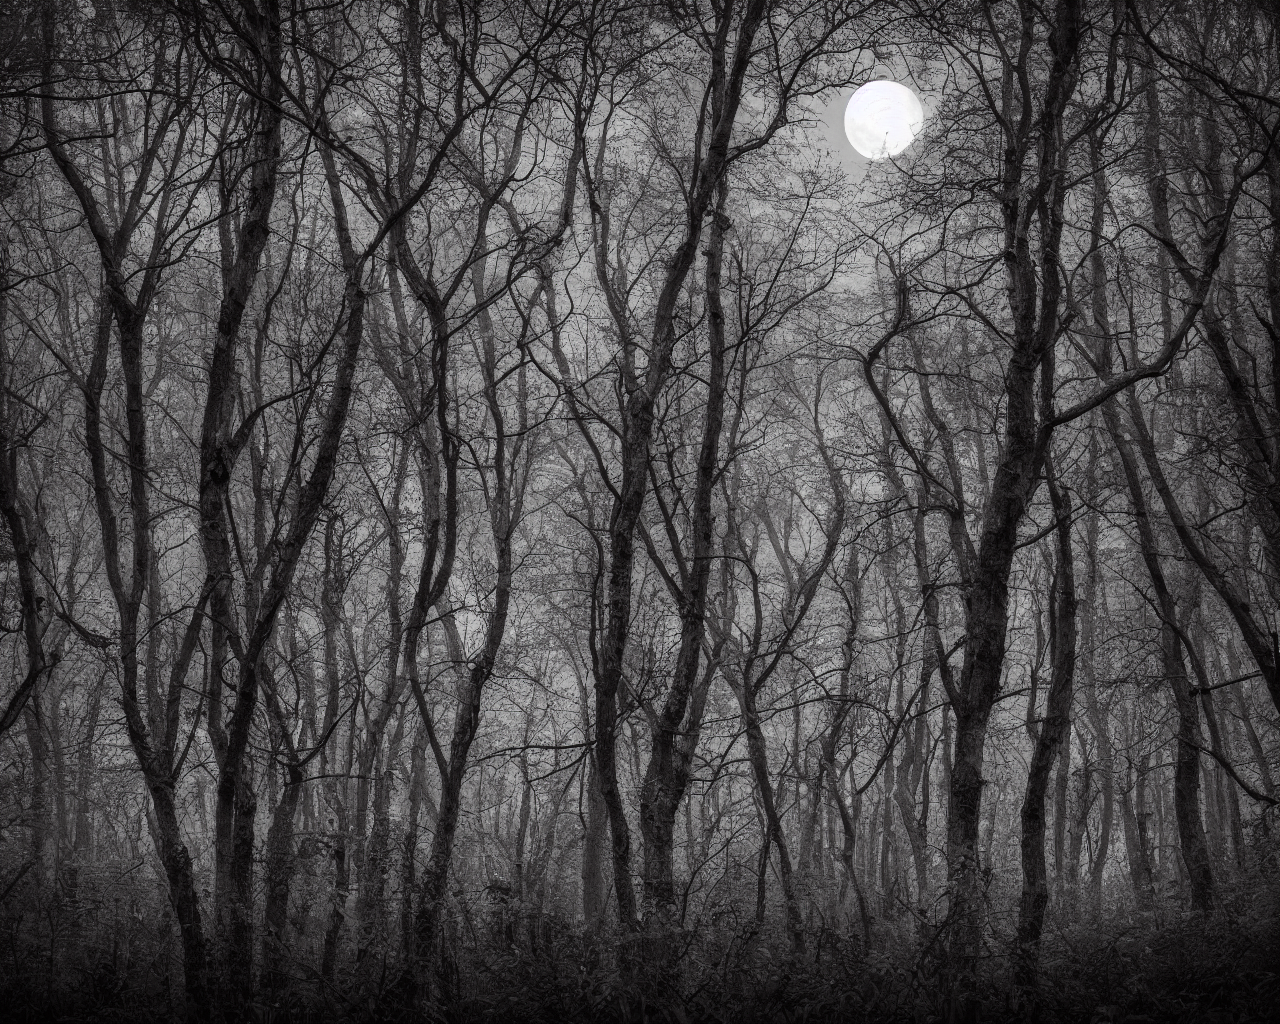 00026-14-nikon_d8102C_spooky_haunted_forest_at_night_under_a_full_moon2C_ghost.png